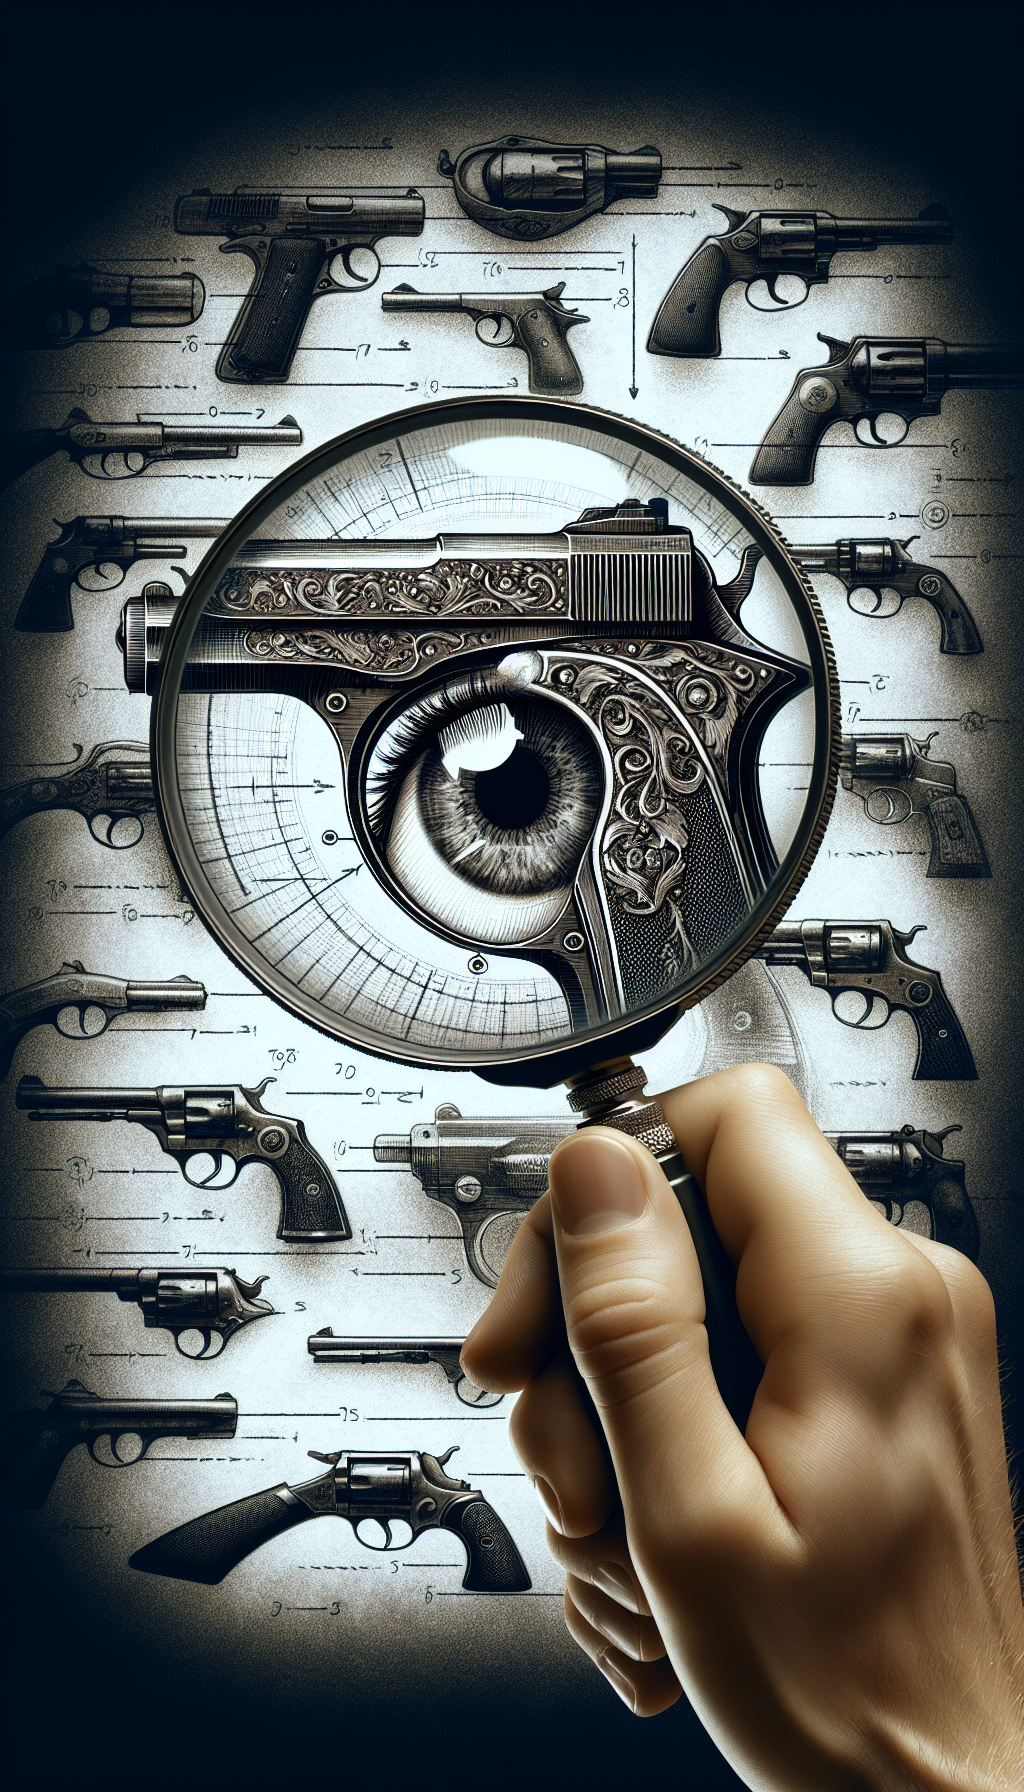 A magnifying glass with an eye peering through it overlaps the image of an antique handgun. Inside the lens, fine details such as intricate engravings and aged patina are magnified, with small tick marks and notes pointing to key features. Around the firearm, ephemeral shadows suggest various other antique guns, symbolizing the breadth of appraisal expertise.